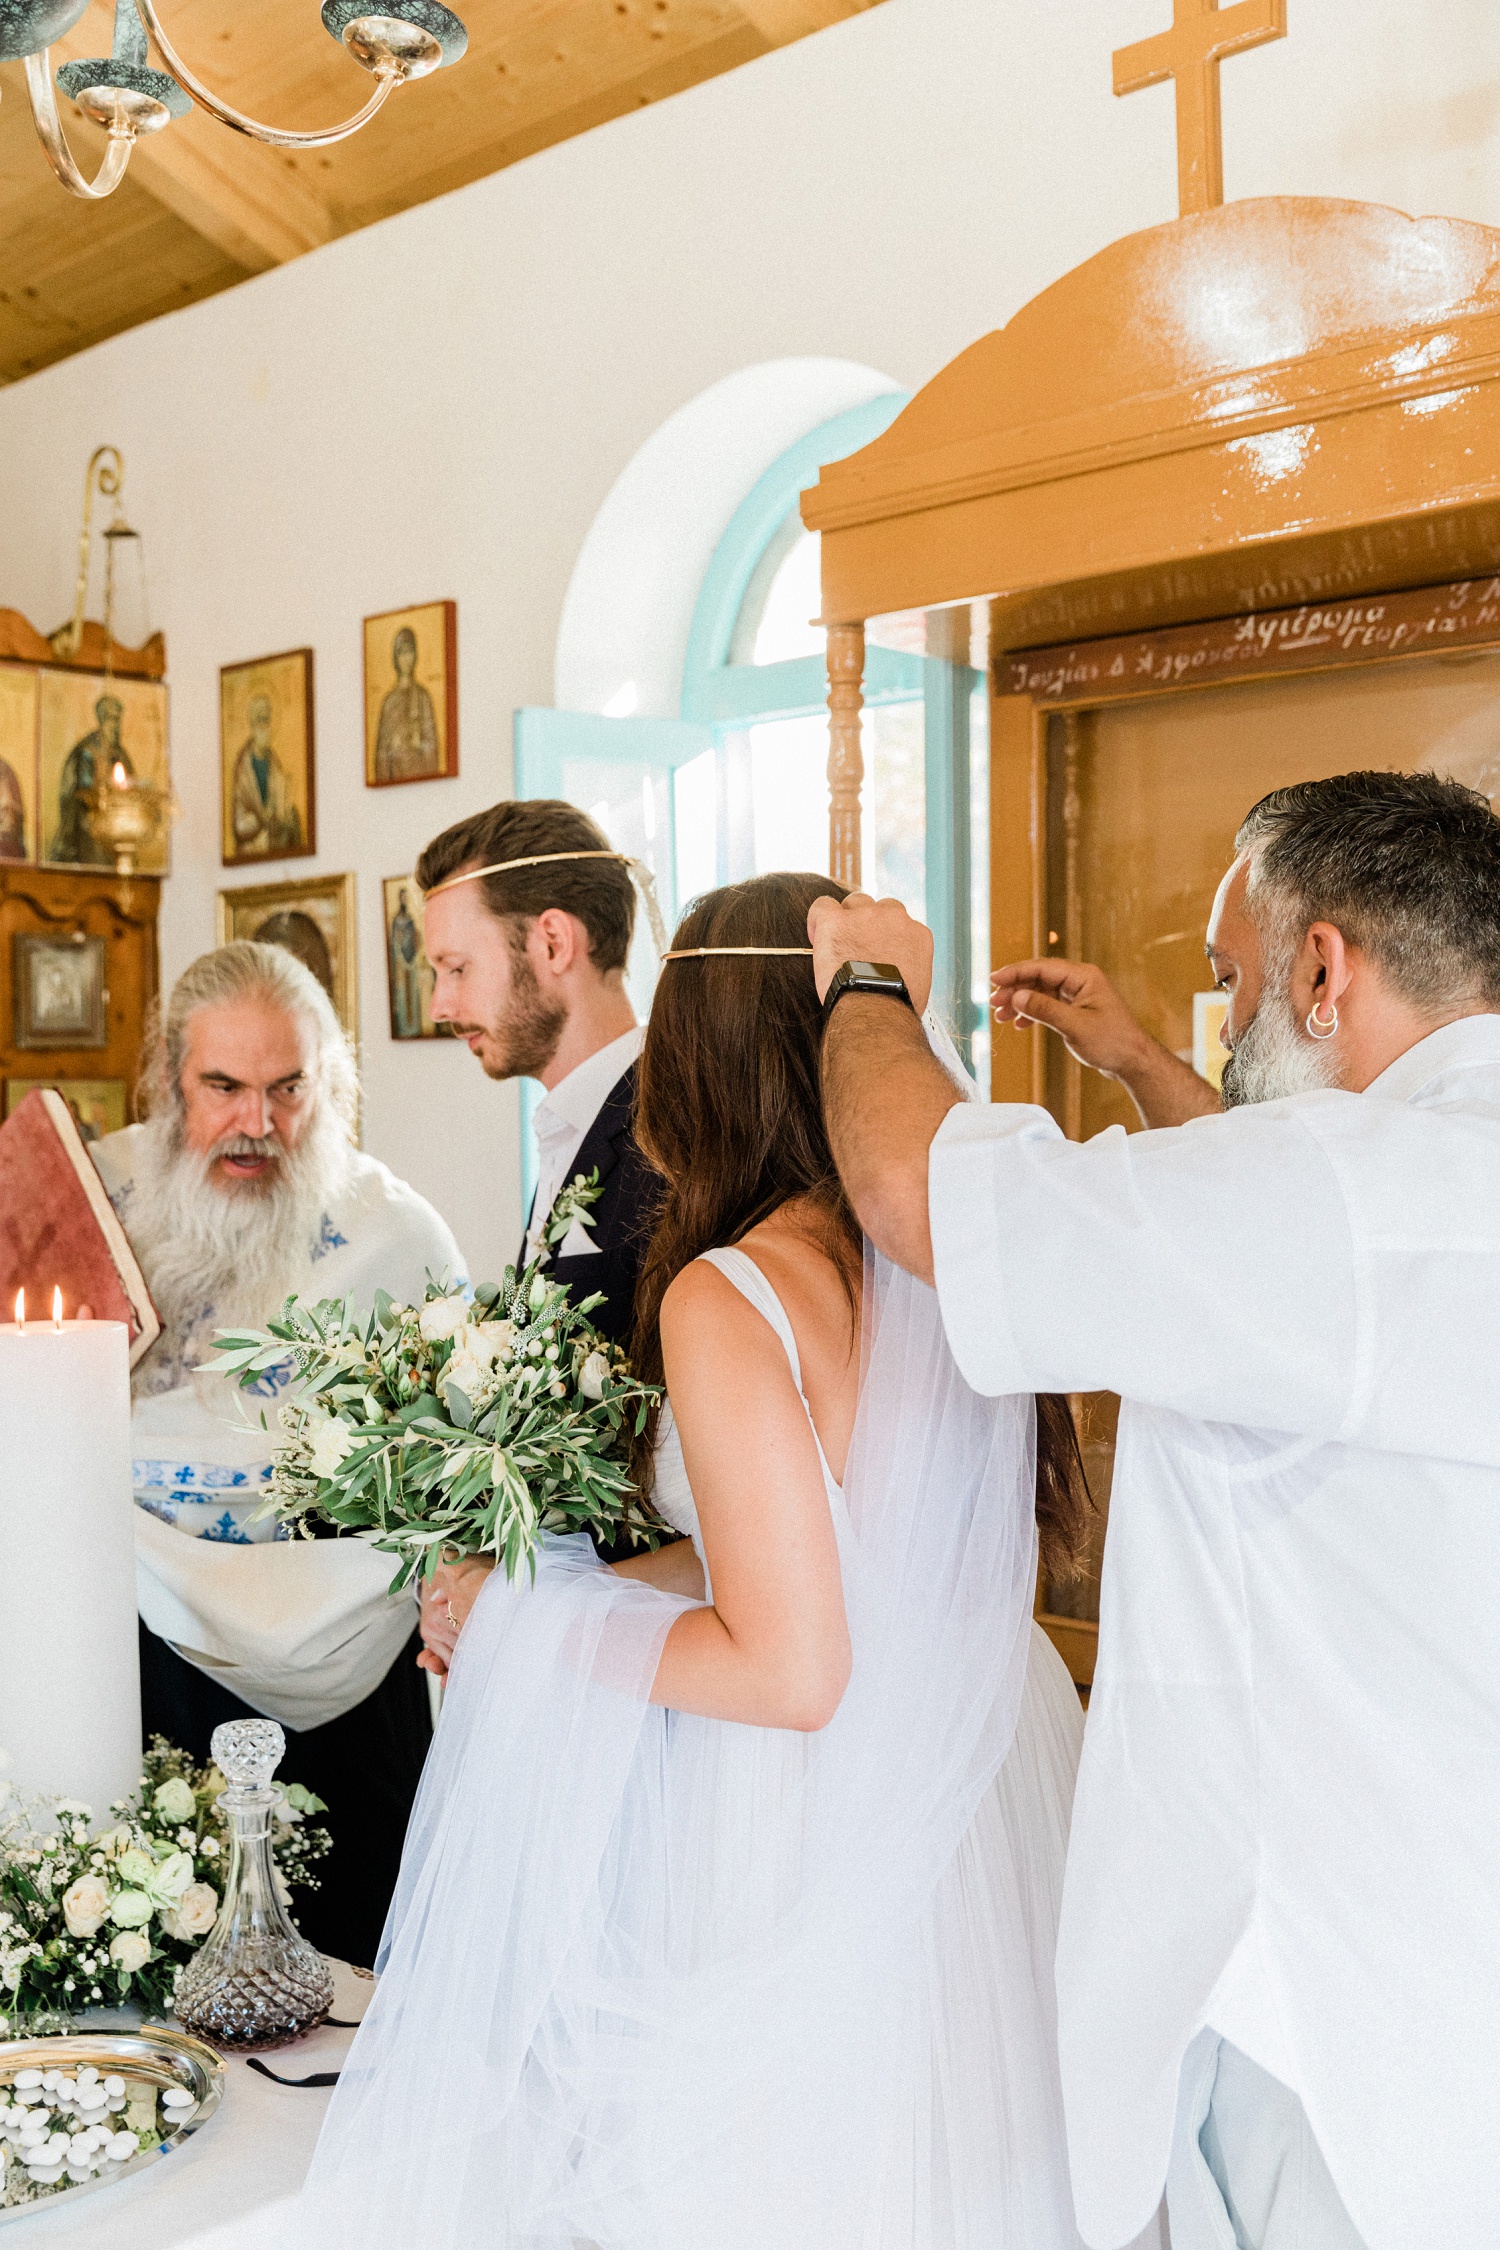 The couple, priest and best man circle the alter during their Orthodox wedding ceremony in Ithaca